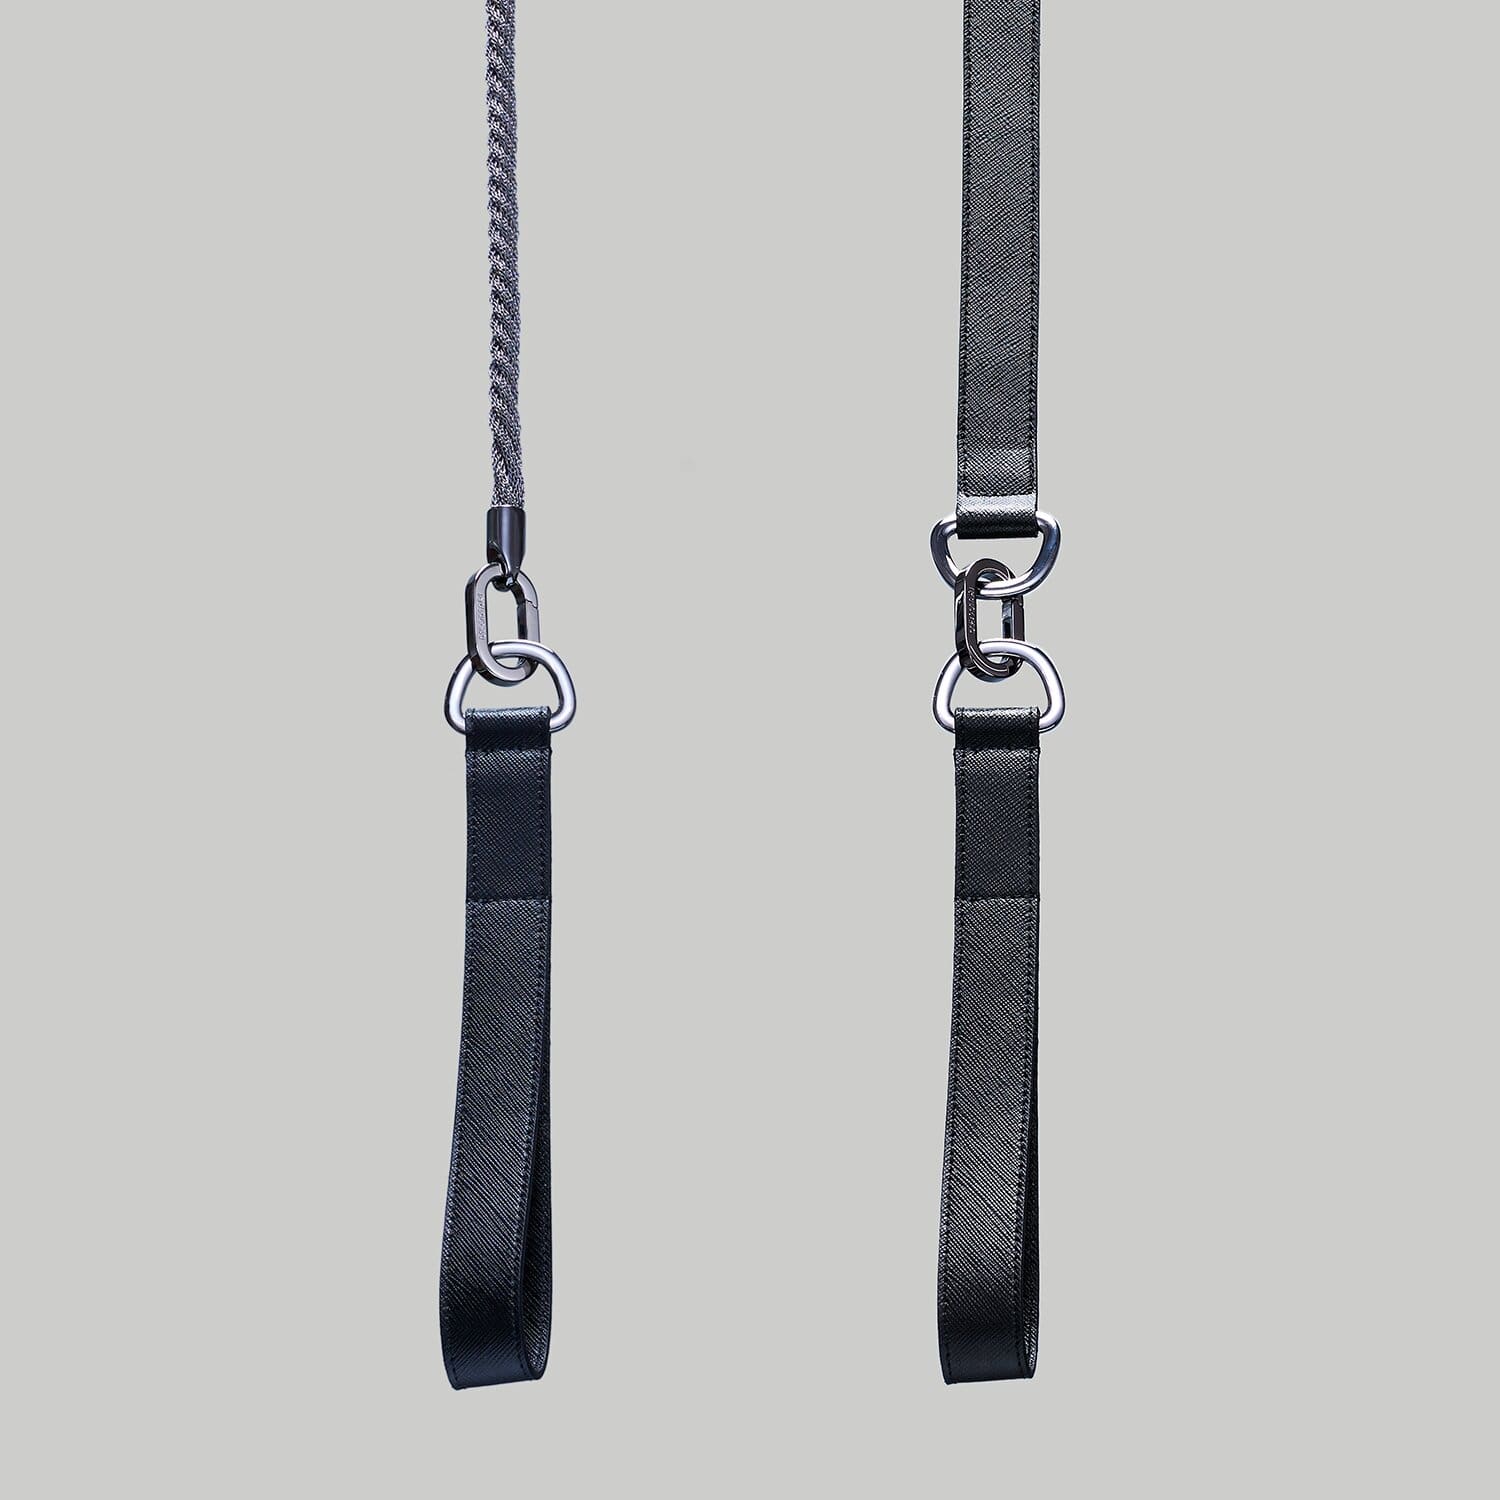 Dog leash handle in black Saffiano leather with Ruthenium